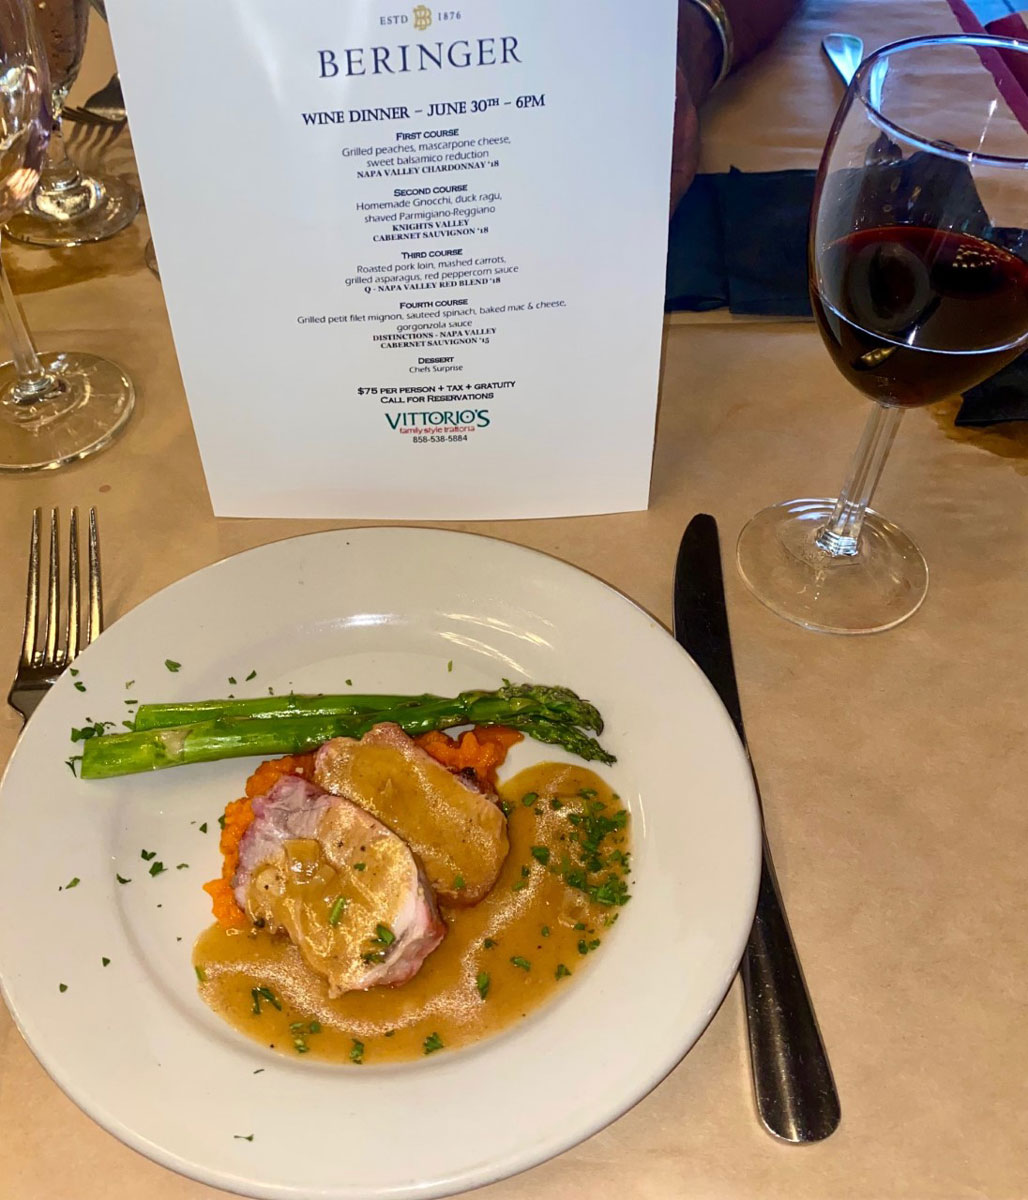 Roasted pork loin, mashed carrots, grilled asparagus served with a red peppercorn sauce paired with the 2018 Q red blend. Photo by Rico Cassoni